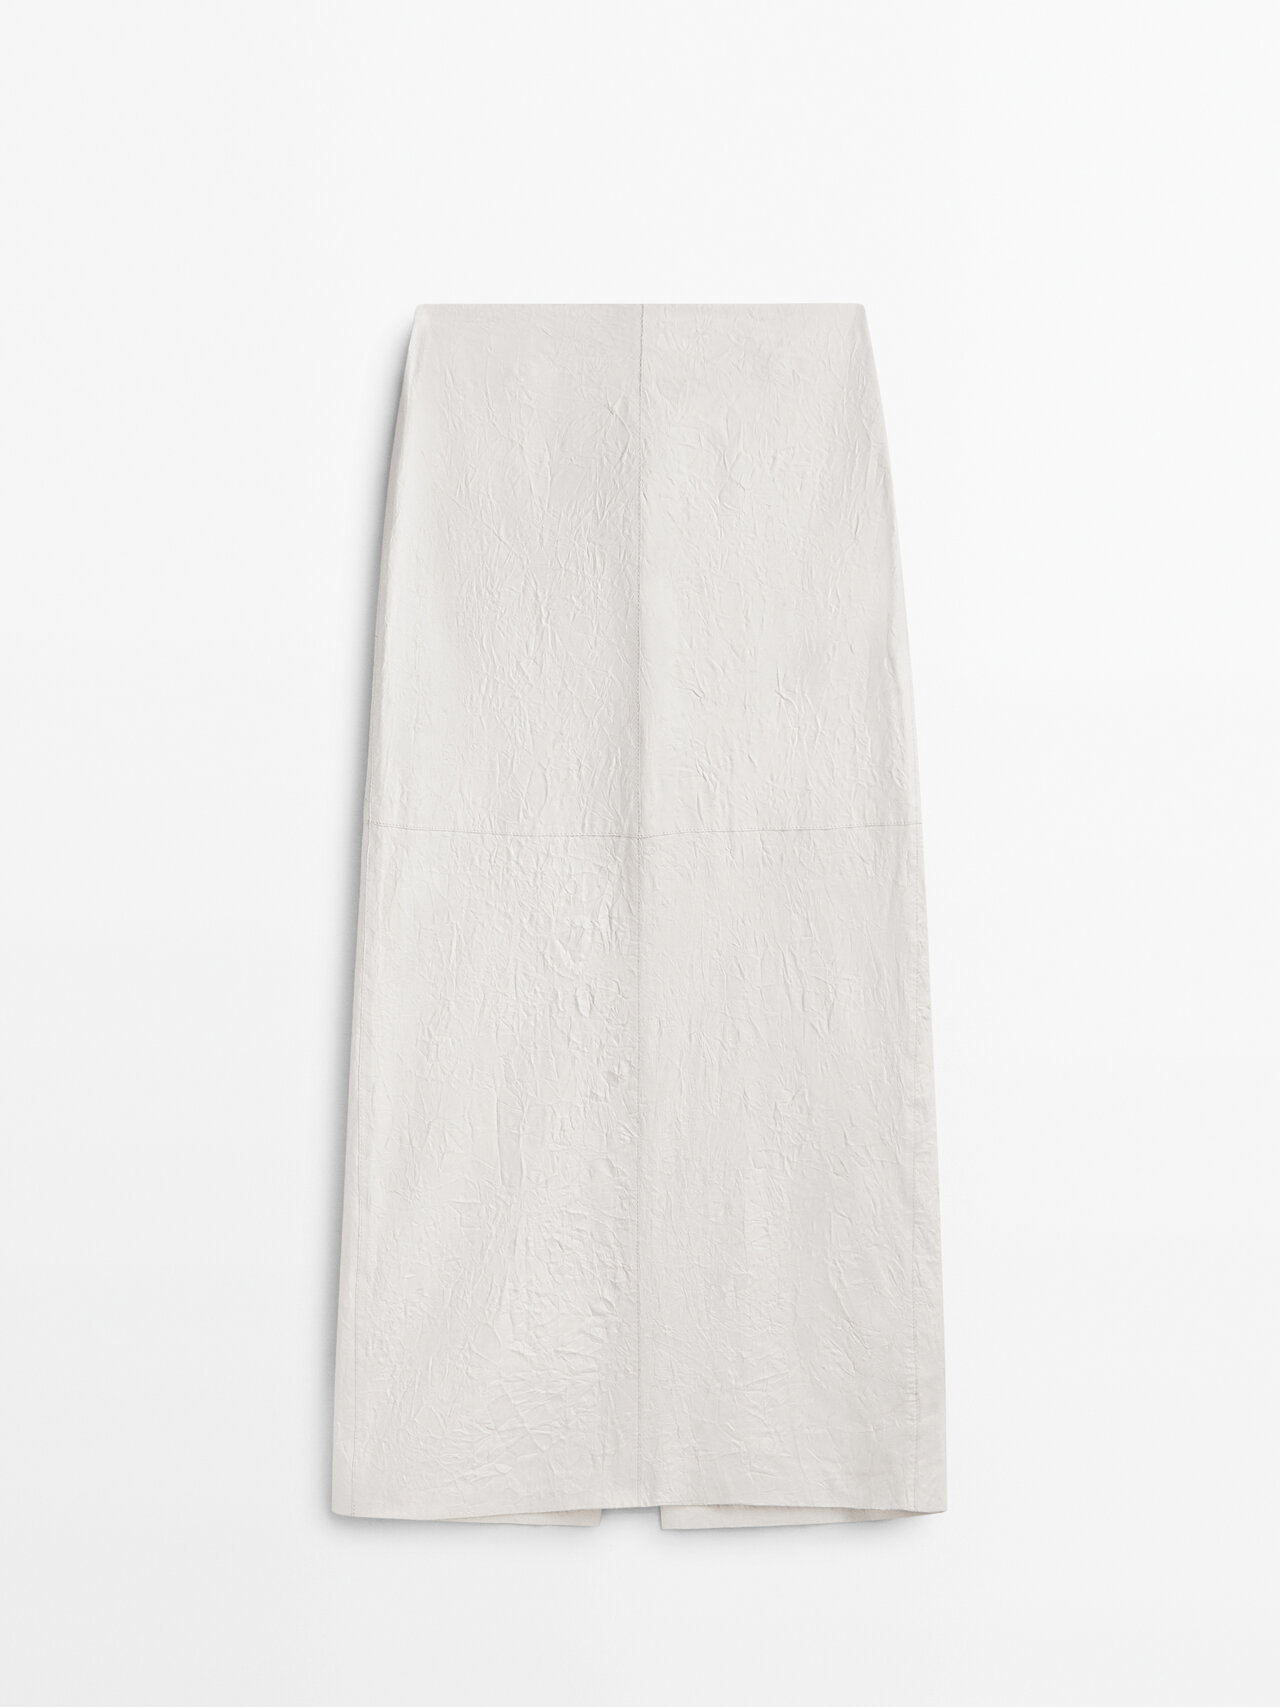 Massimo Dutti Crackled Nappa Leather Skirt - Limited Edition In White ...